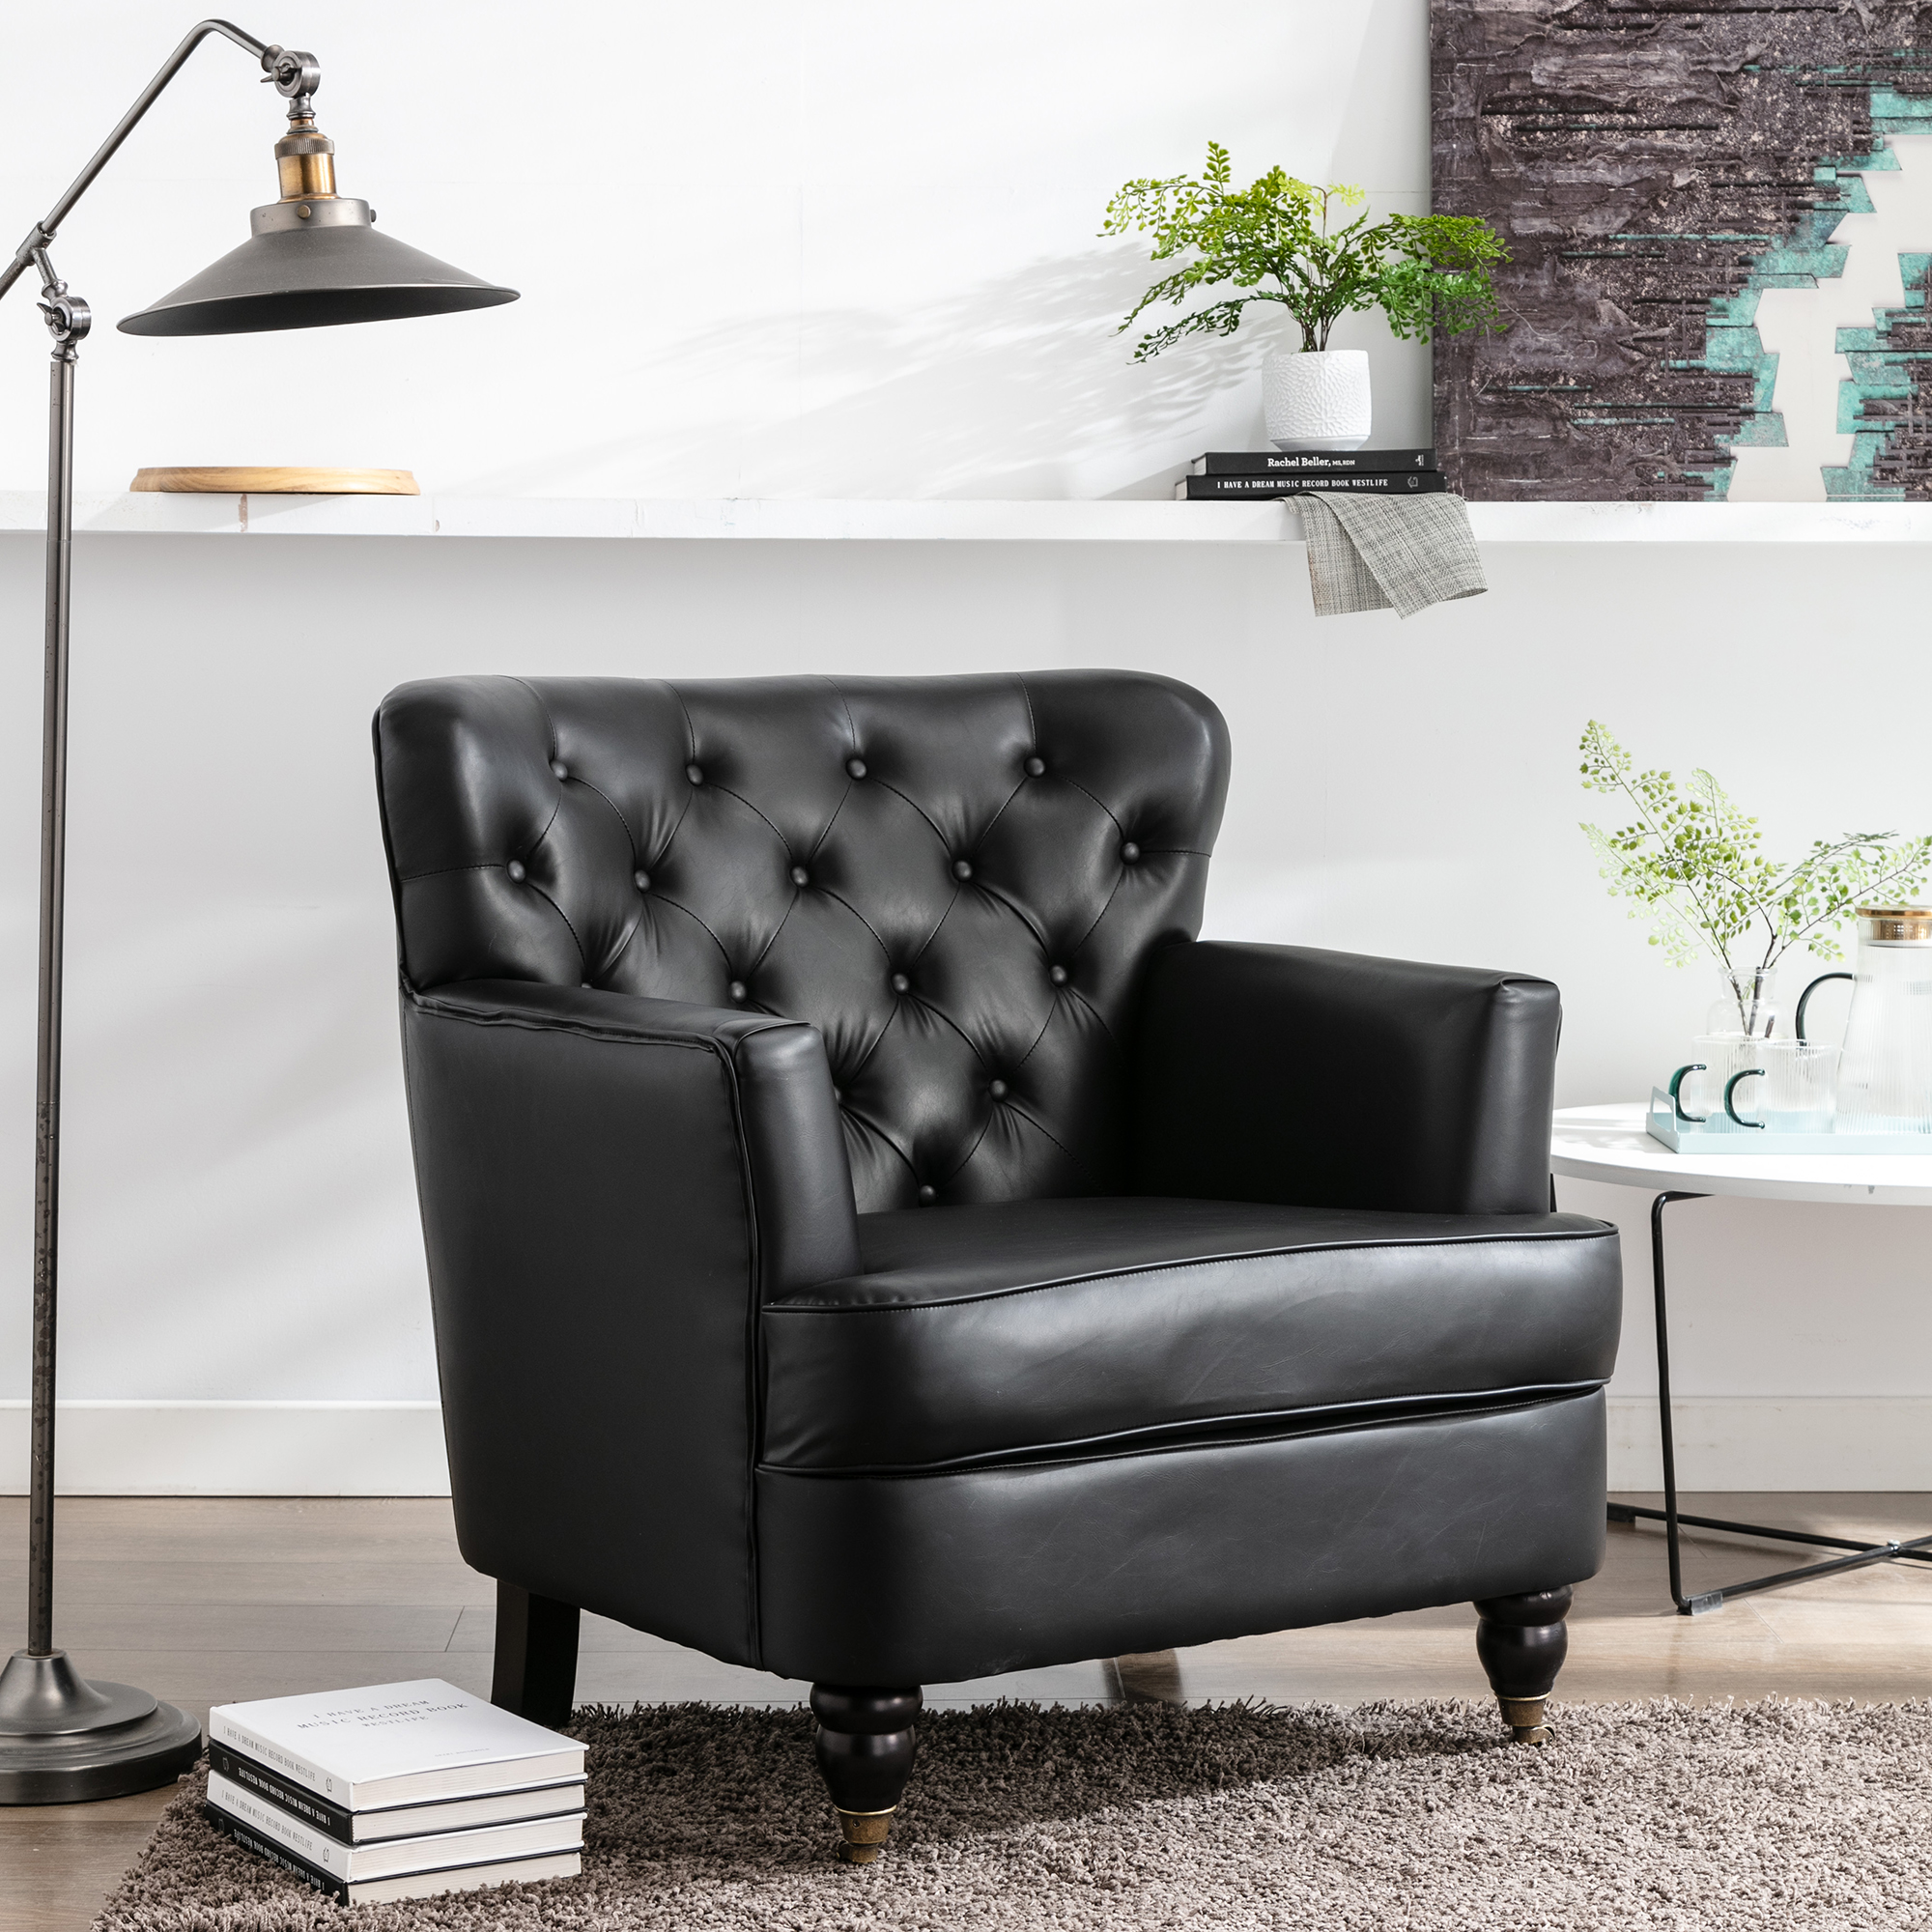 Hengming PU leather club chair ,Accent Chair for Living Room ,Office Arm Chair with Solid Wood Legs,Black-CASAINC